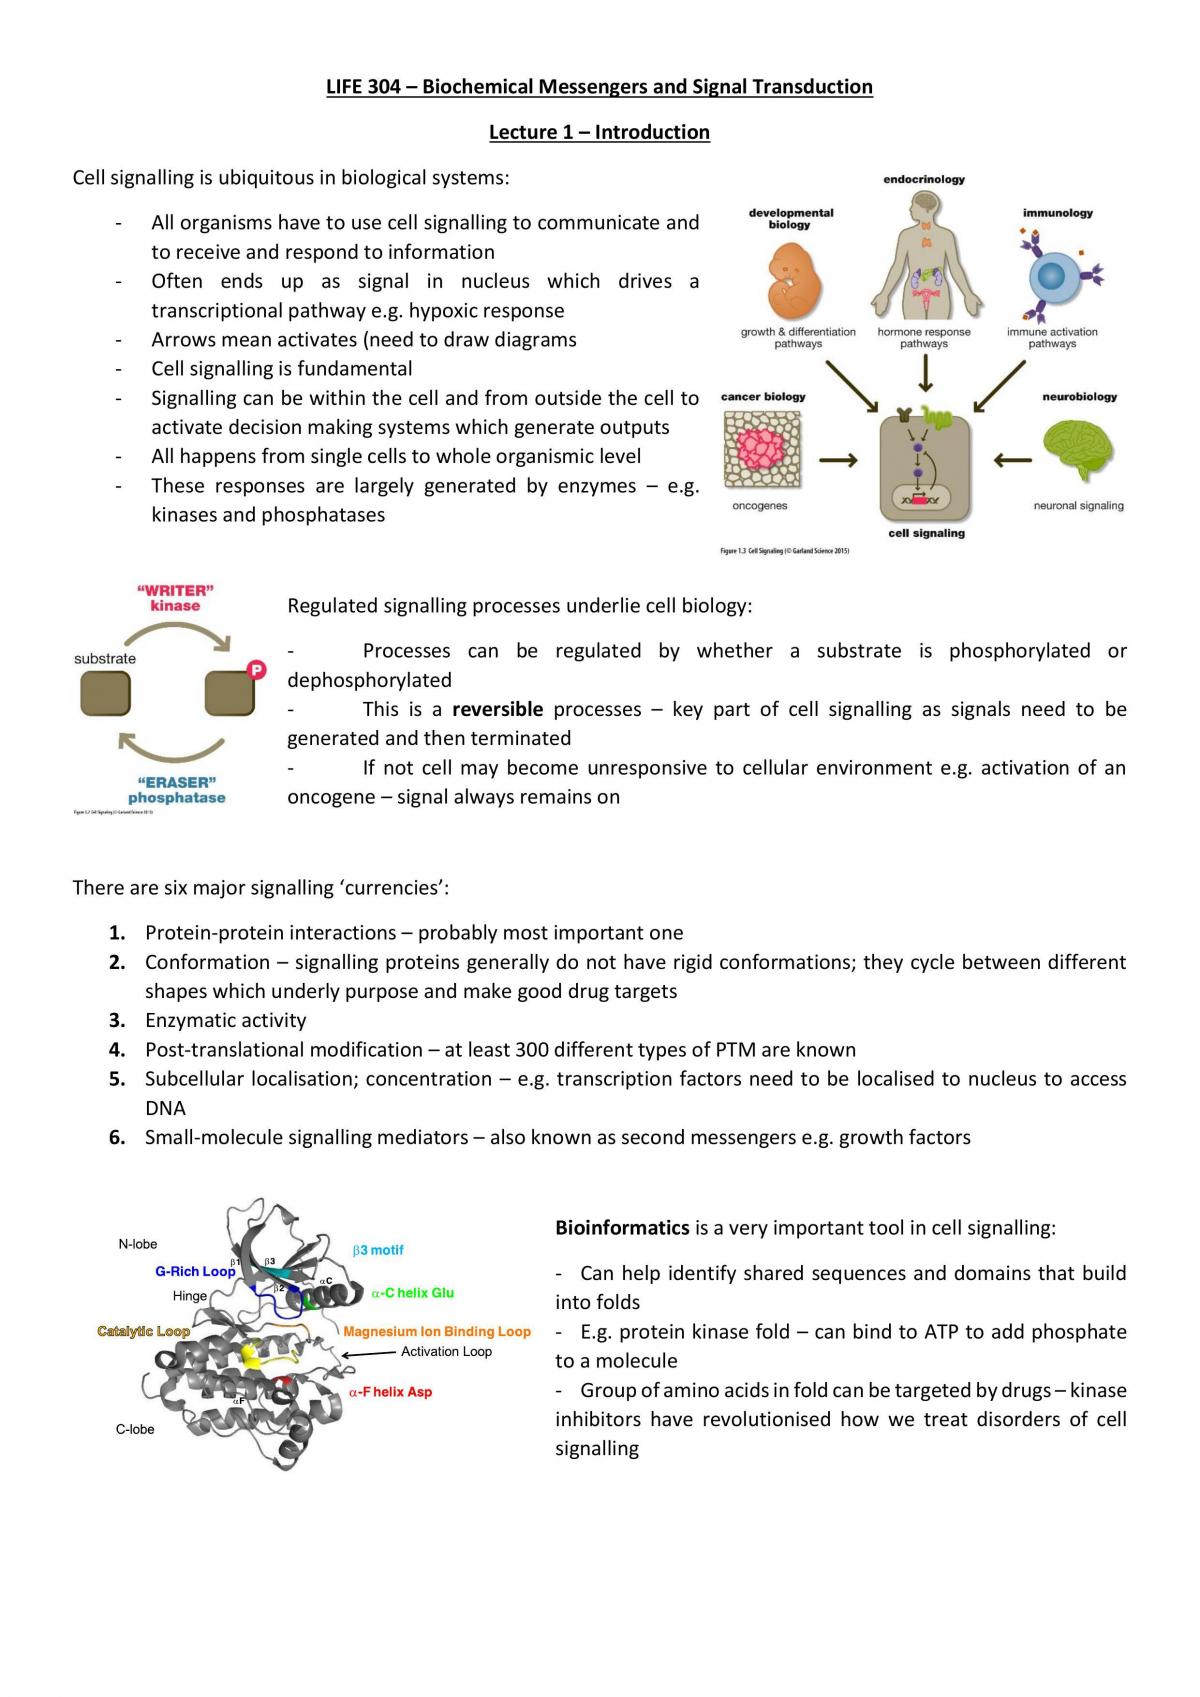 Notes for Biochemical Messengers and Signal Transduction - Page 1